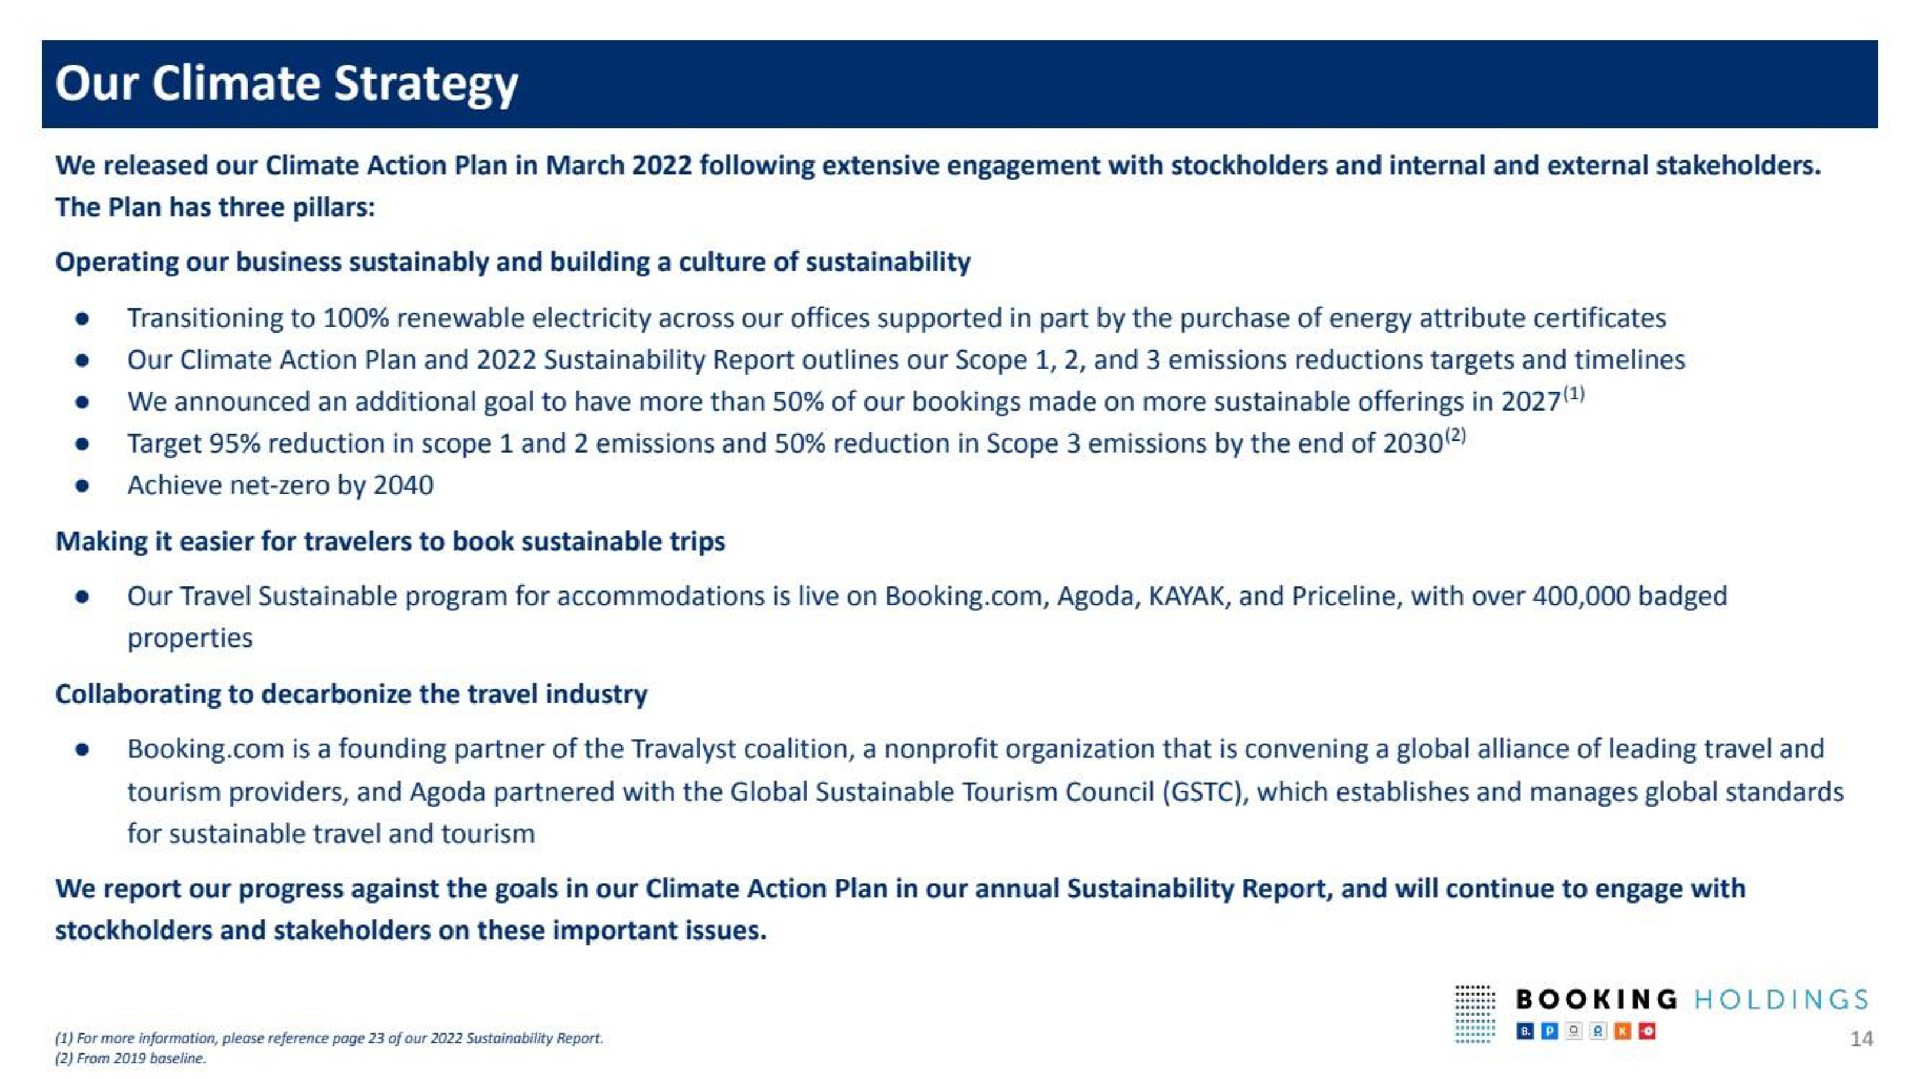 our climate strategy | Booking Holdings